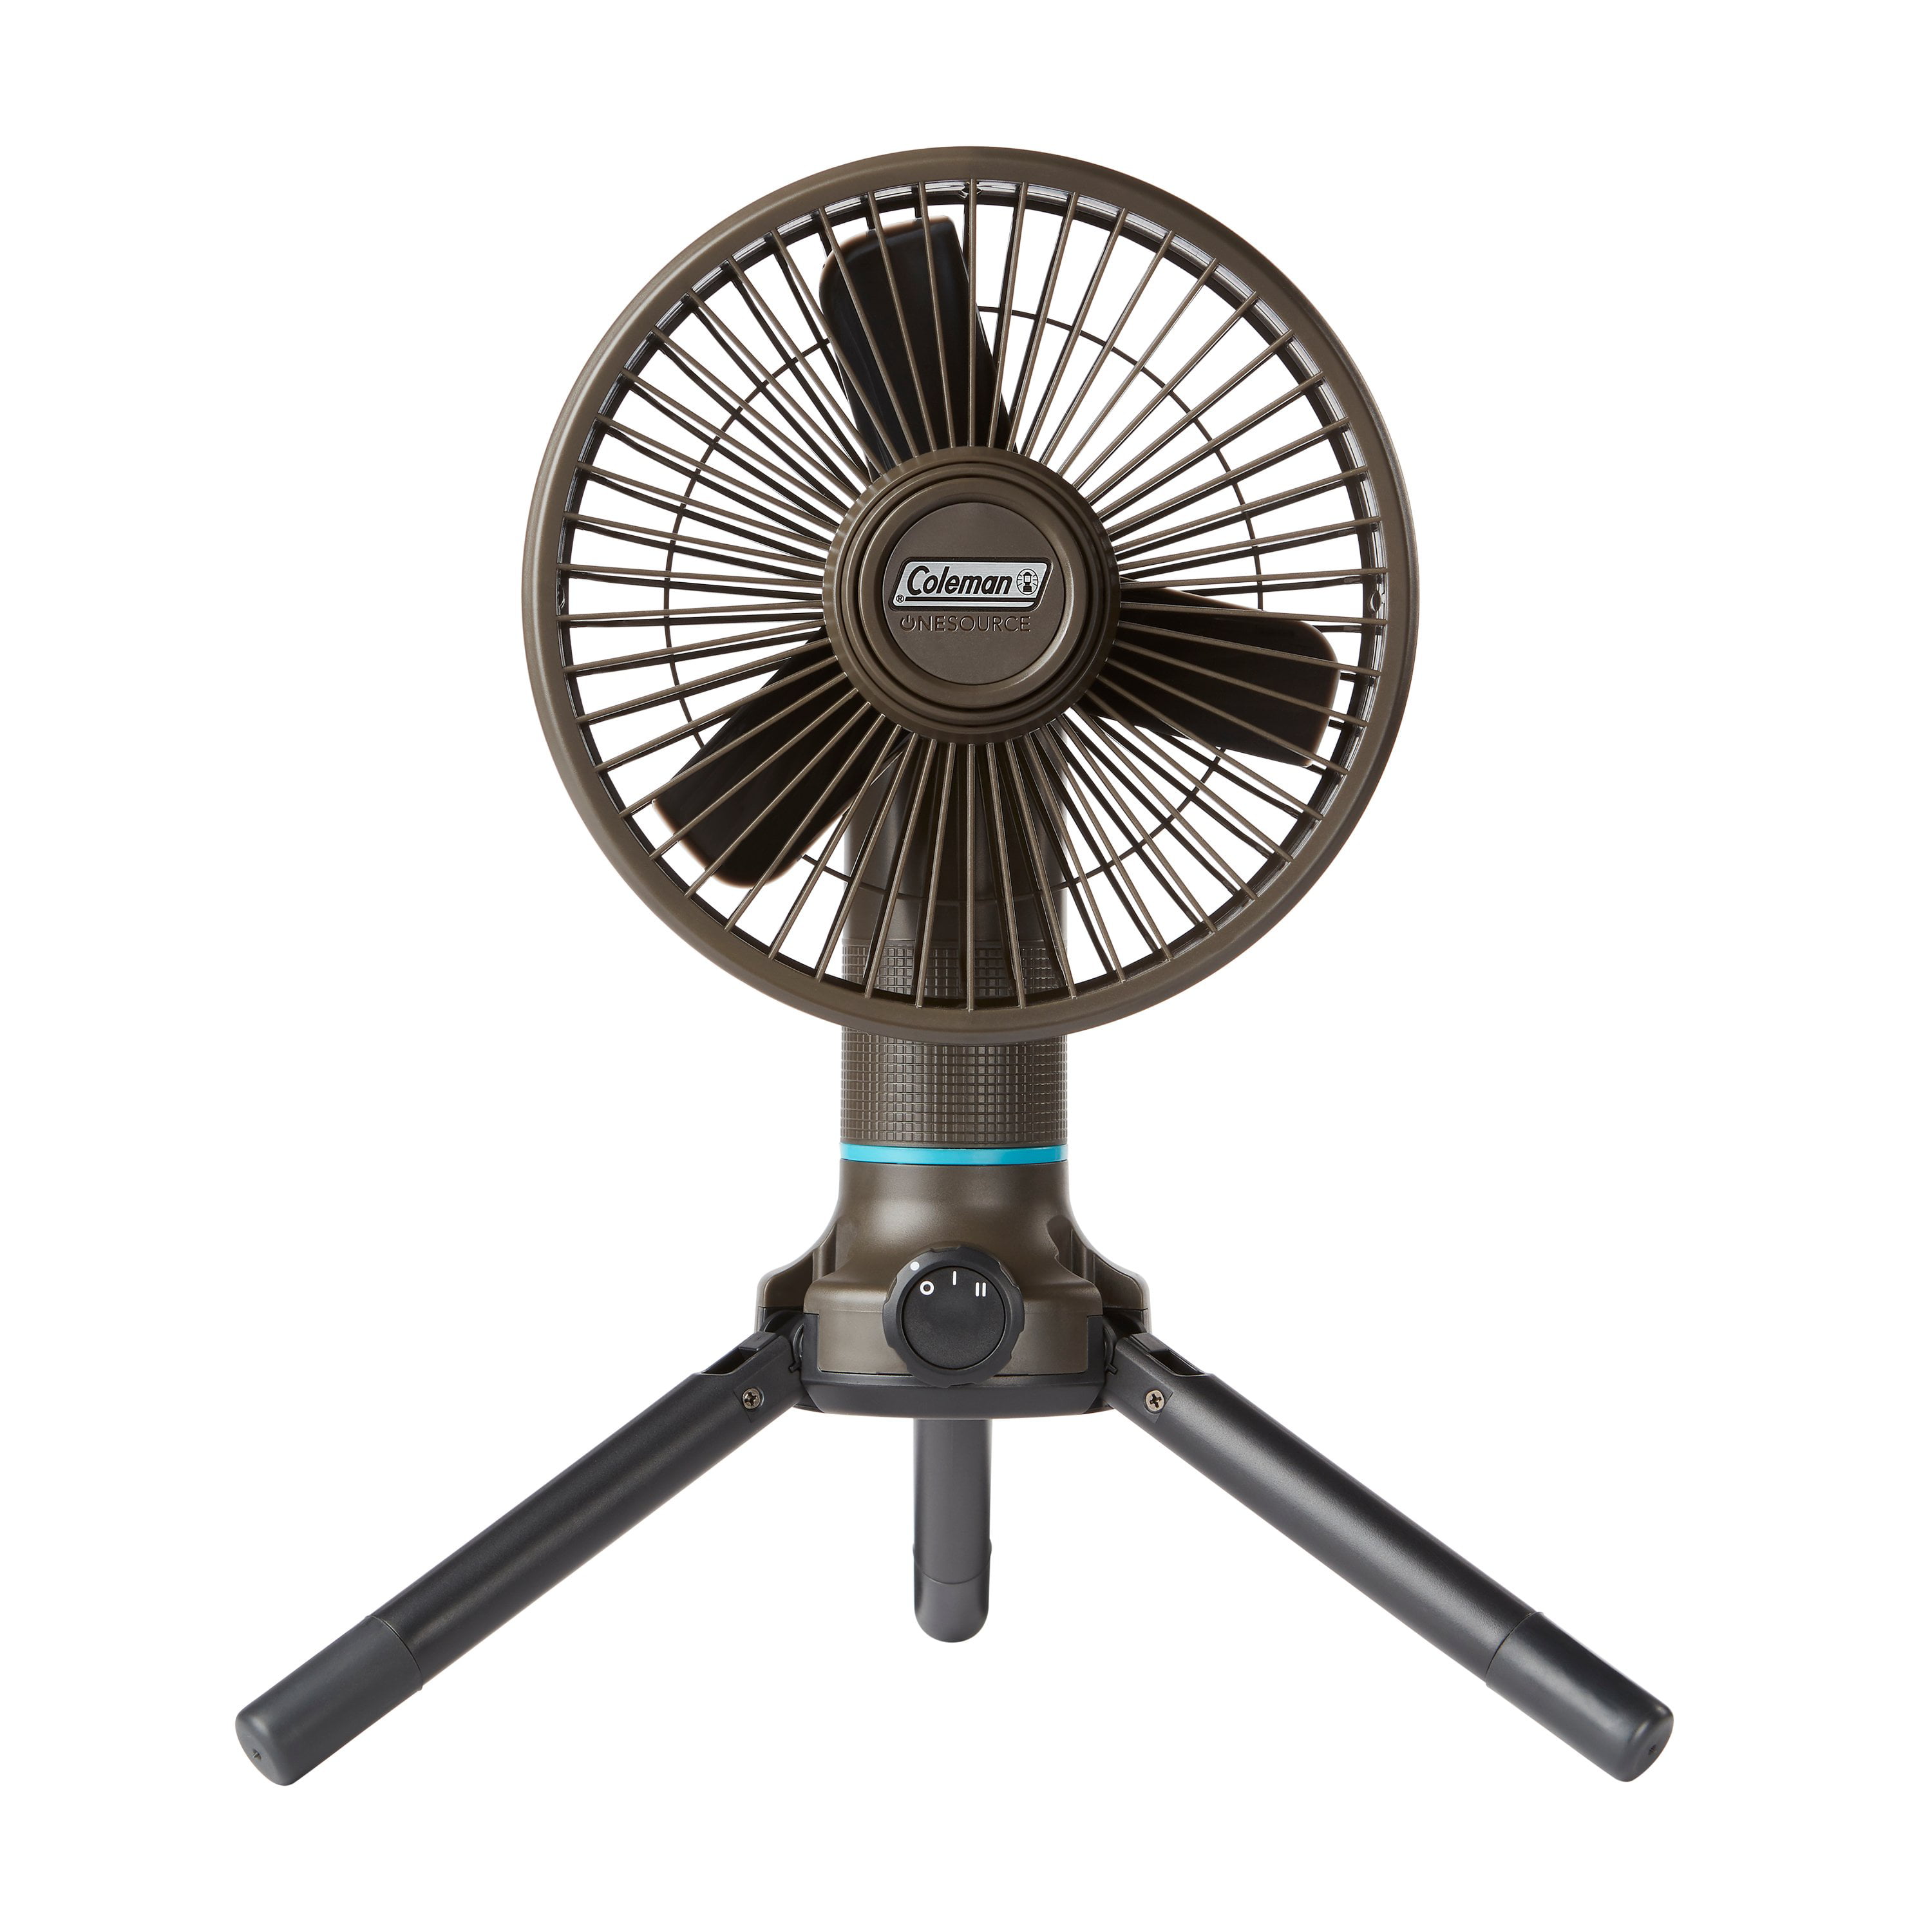 Coleman Onesource Multi-Speed Portable Camping Fan & Rechargeable Battery (Black) $49.97 + Free Shipping